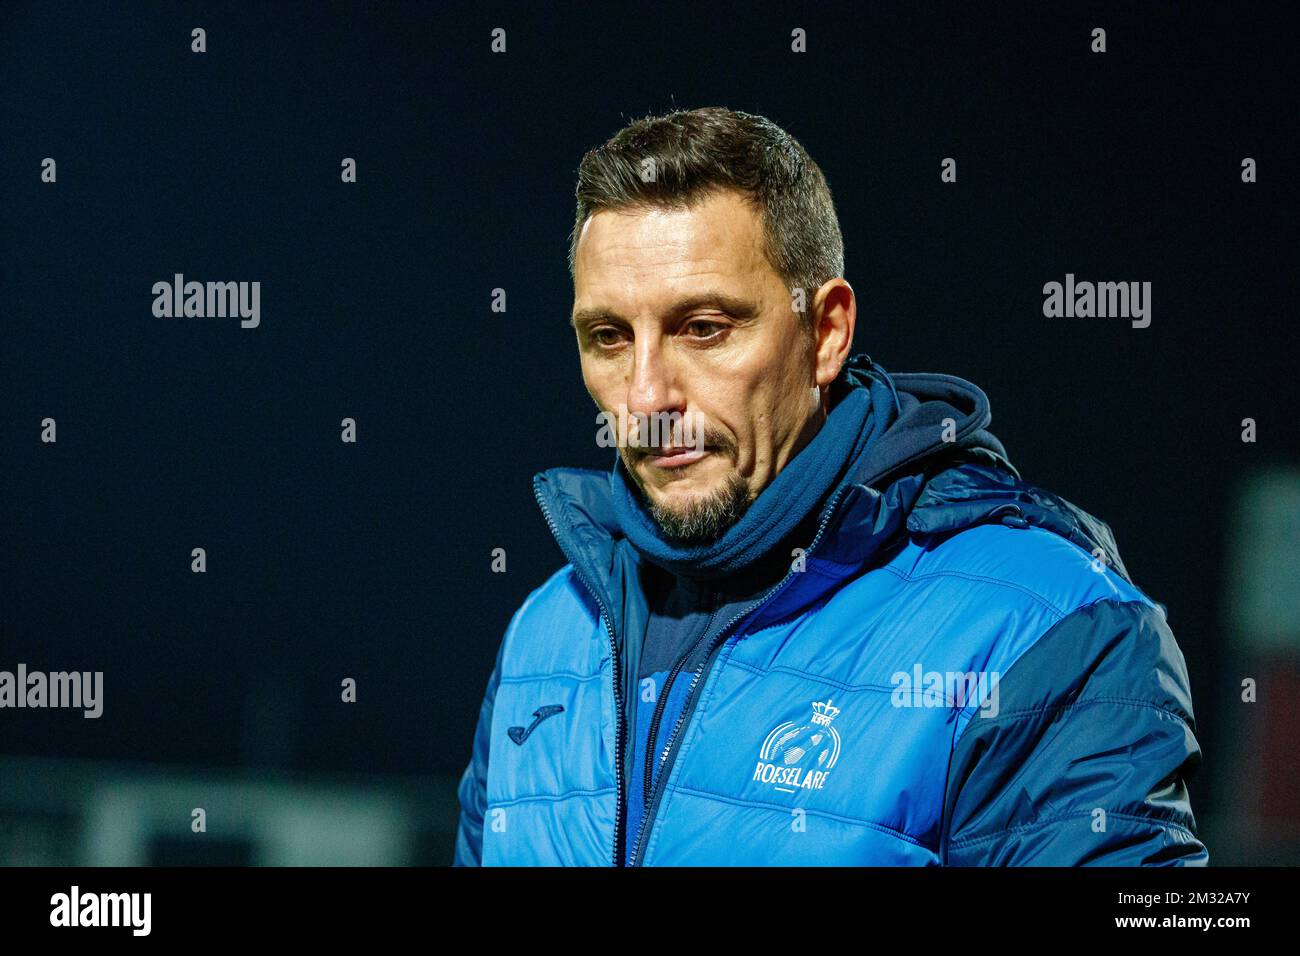 Roeselare's head coach Christophe Gamel pictured during a soccer match between KSV Roeselare and Beerschot VA, Friday 07 February 2020 in Roeselare, on day 25 of the 'Proximus League' 1B division of the Belgian soccer championship. BELGA PHOTO DAVID CATRY Stock Photo